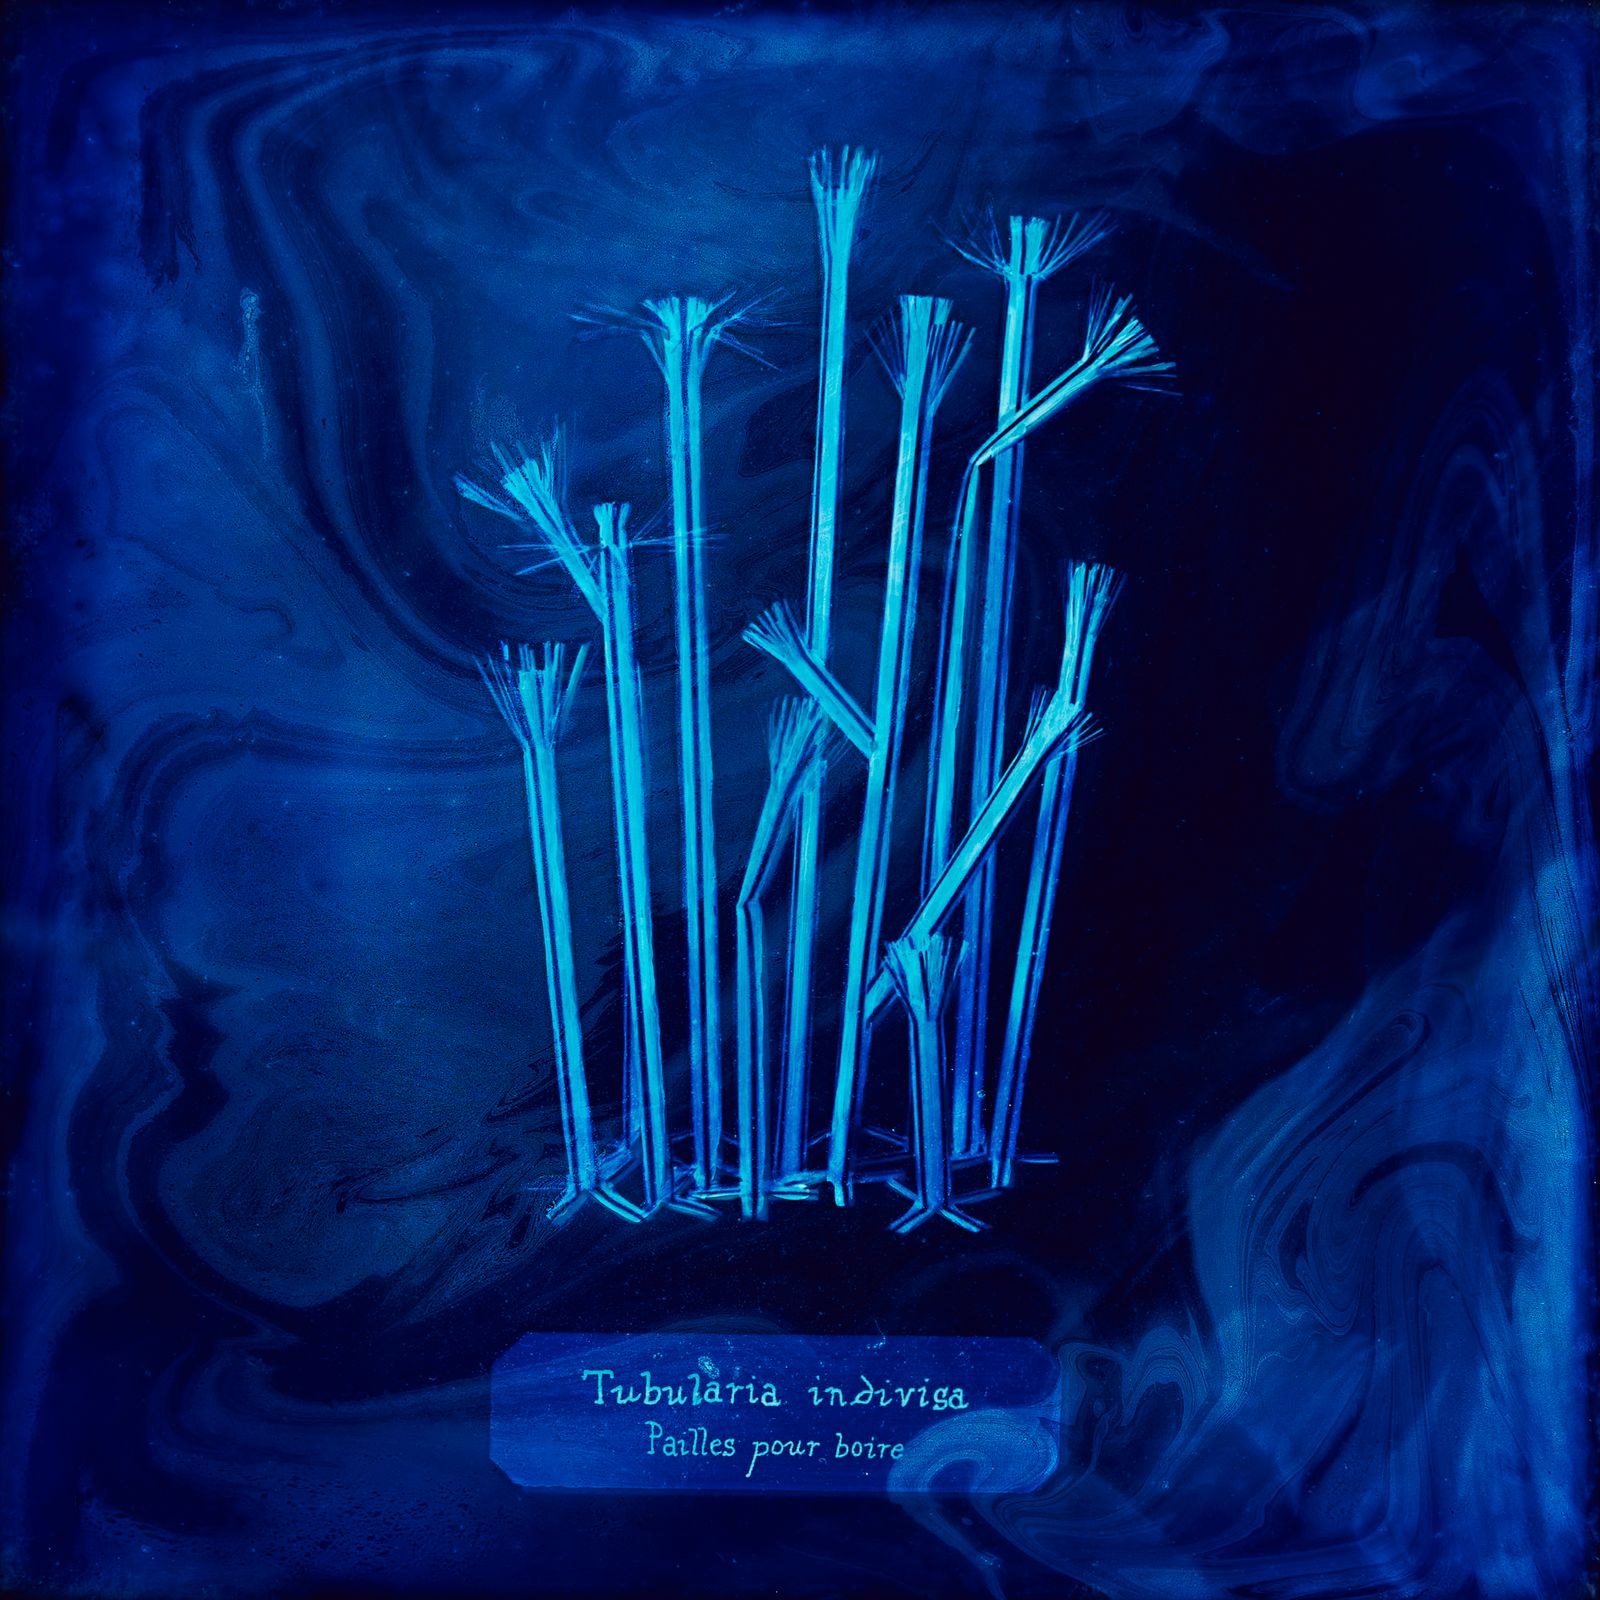 © Manon Lanjouère - drinking straw. cyanotype on glass and fluo vinyl emulsion, 20x20cm